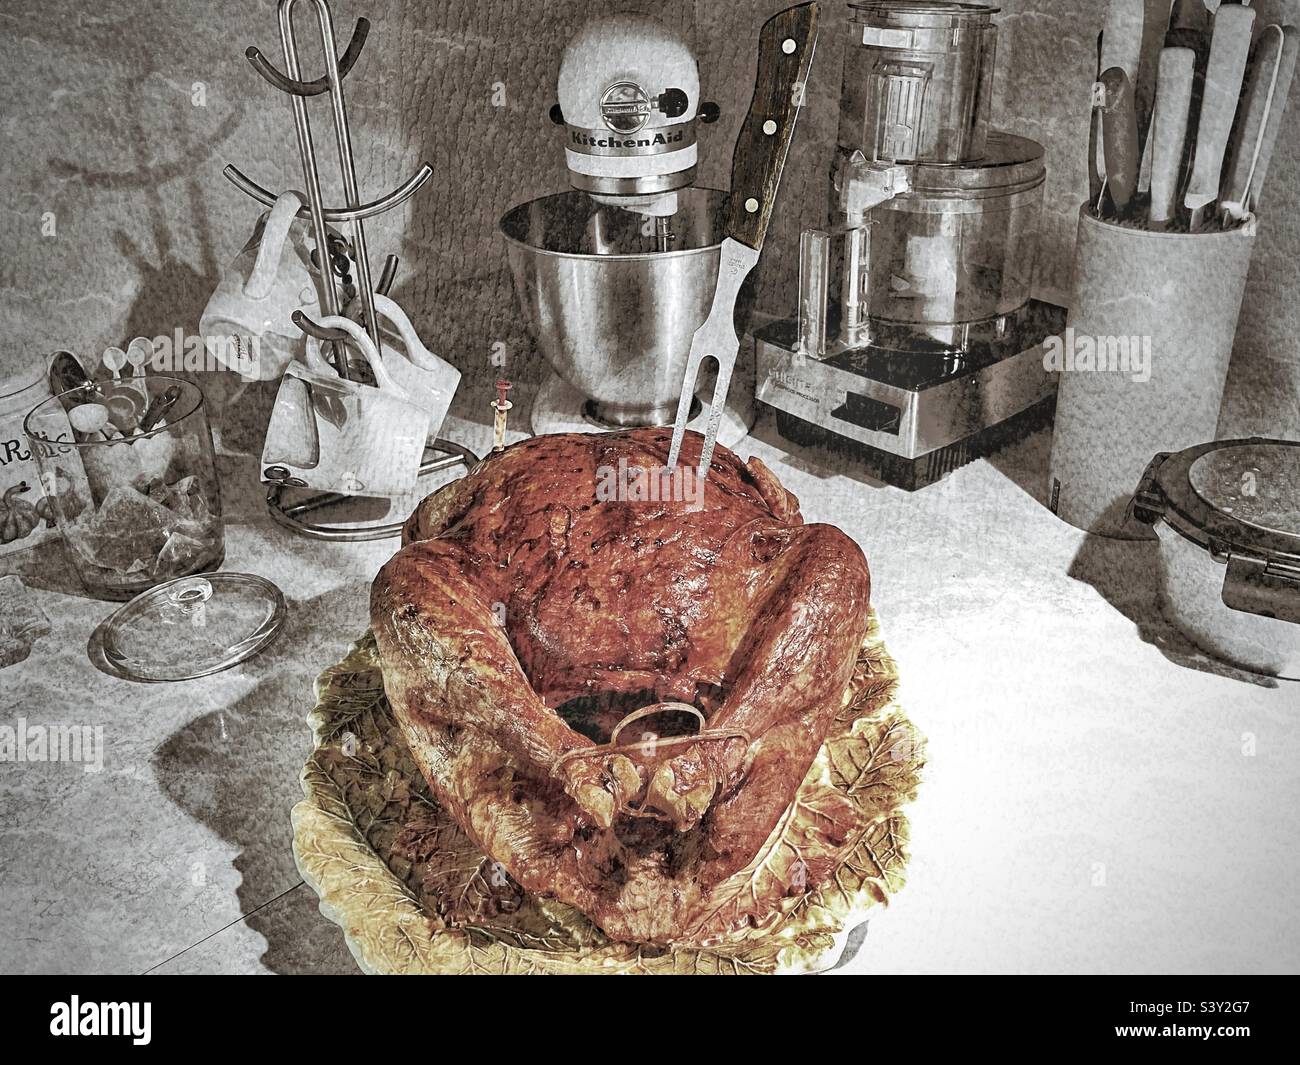 A turkey, cooked to a golden brown, is out of the oven and put upon the kitchen counter to rest and cool awhile before being carved on Thanksgiving day in Utah, USA. Grunge and texture digitally added Stock Photo